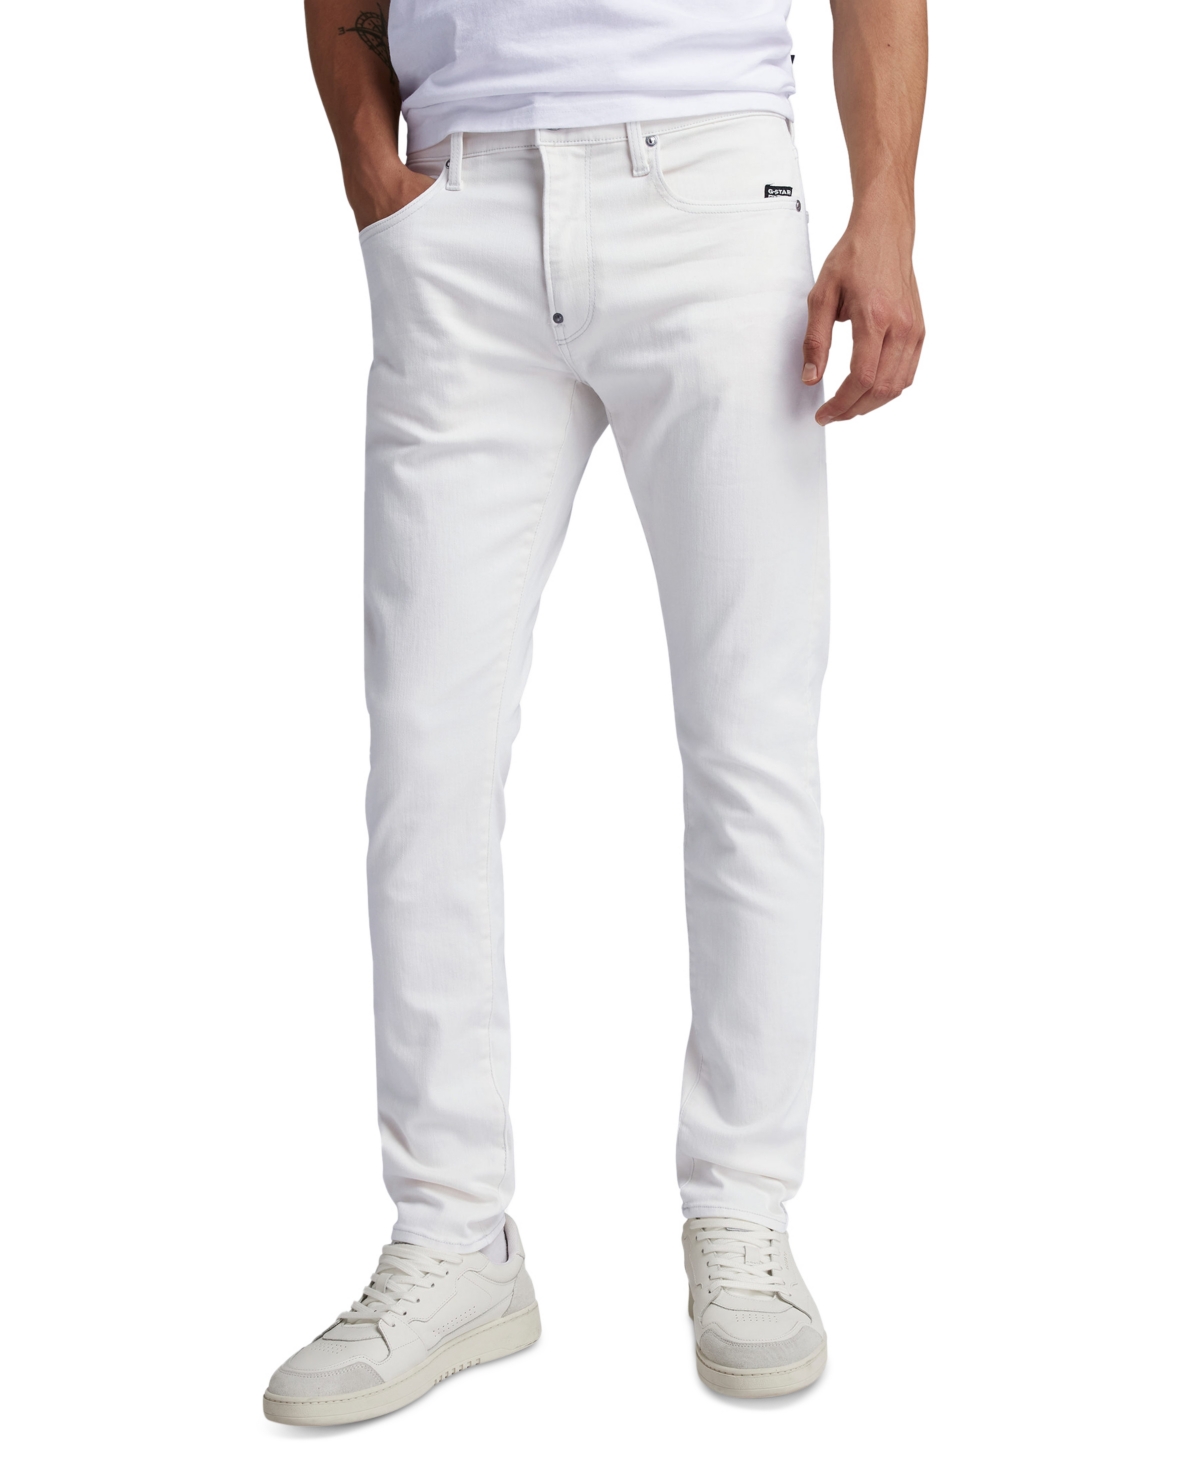 Men's Skinny-Fit Jeans - Paper White Gd